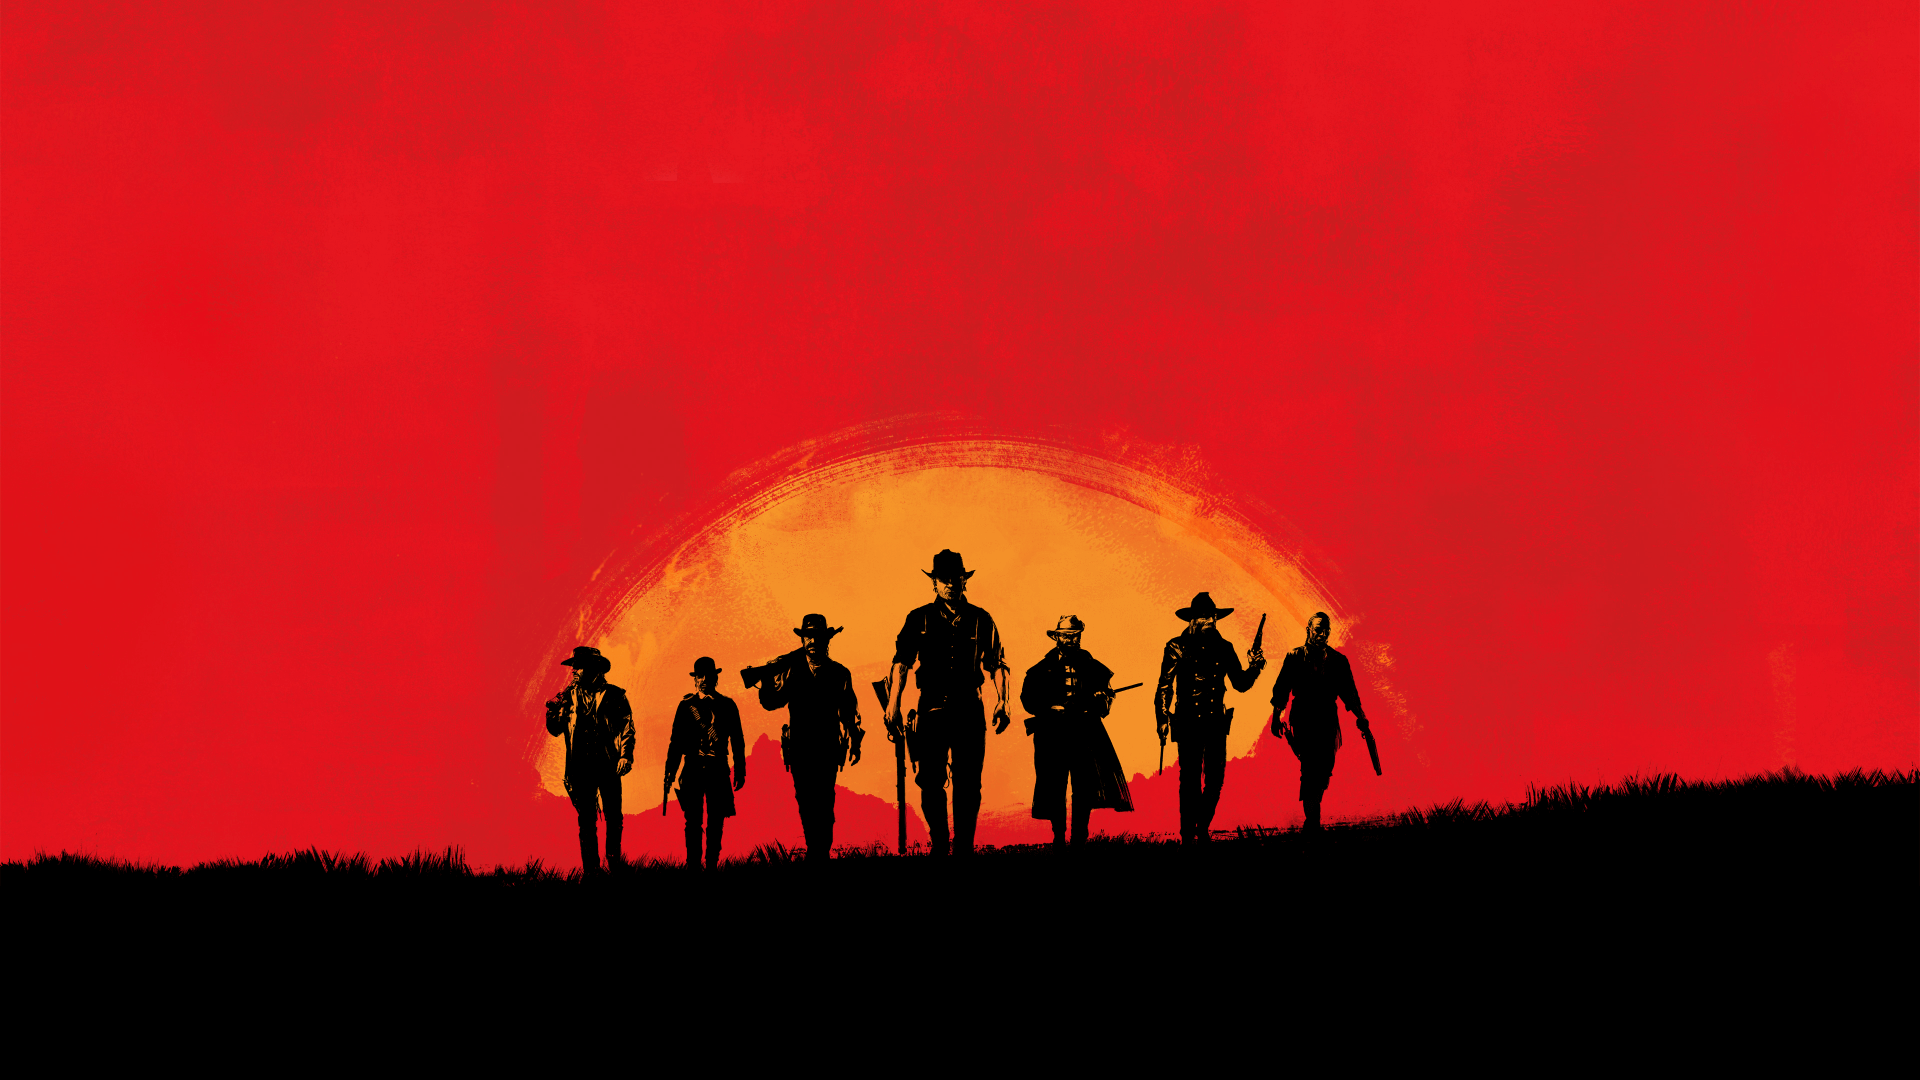 Red Dead Redemption 2 is coming to the Nintendo Switch